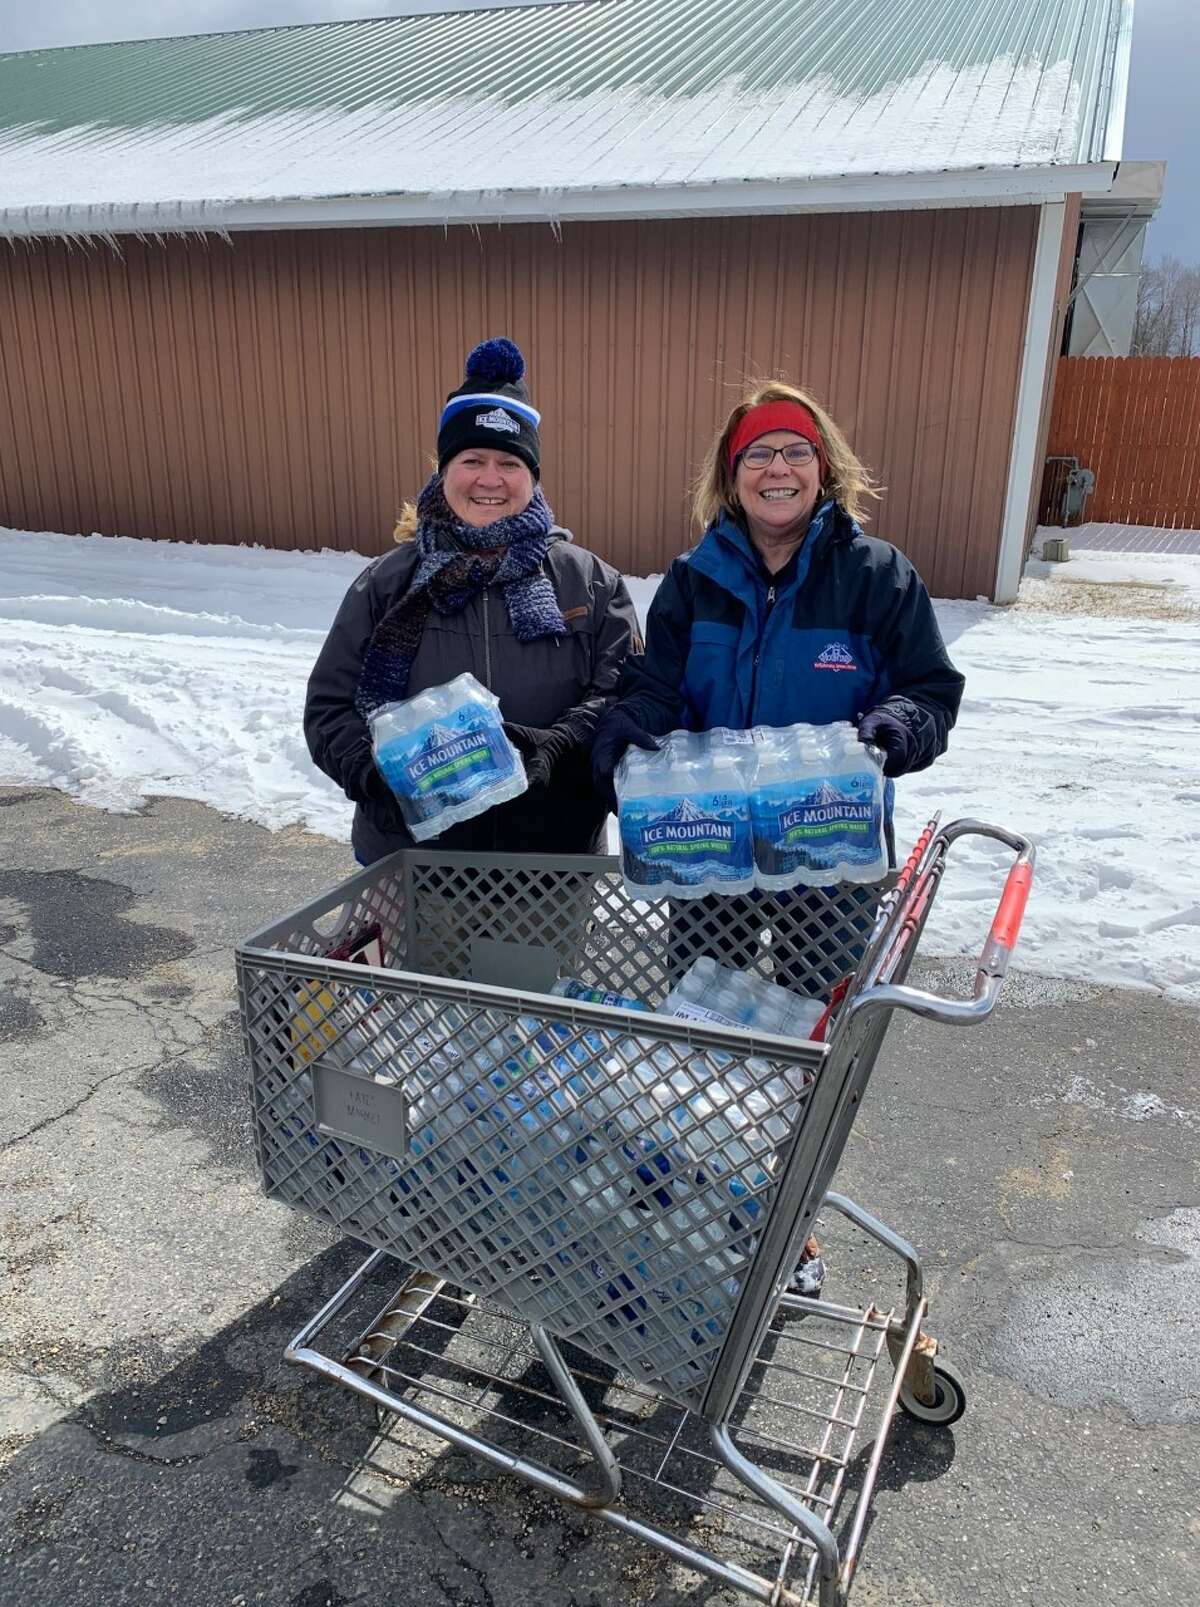 Ice Mountain employees Mary Emerson and Kathy Pratt help distribute food and water during the Barryton Mobile Food Pantry distribution March 12. The organization handed out food to 130 families.